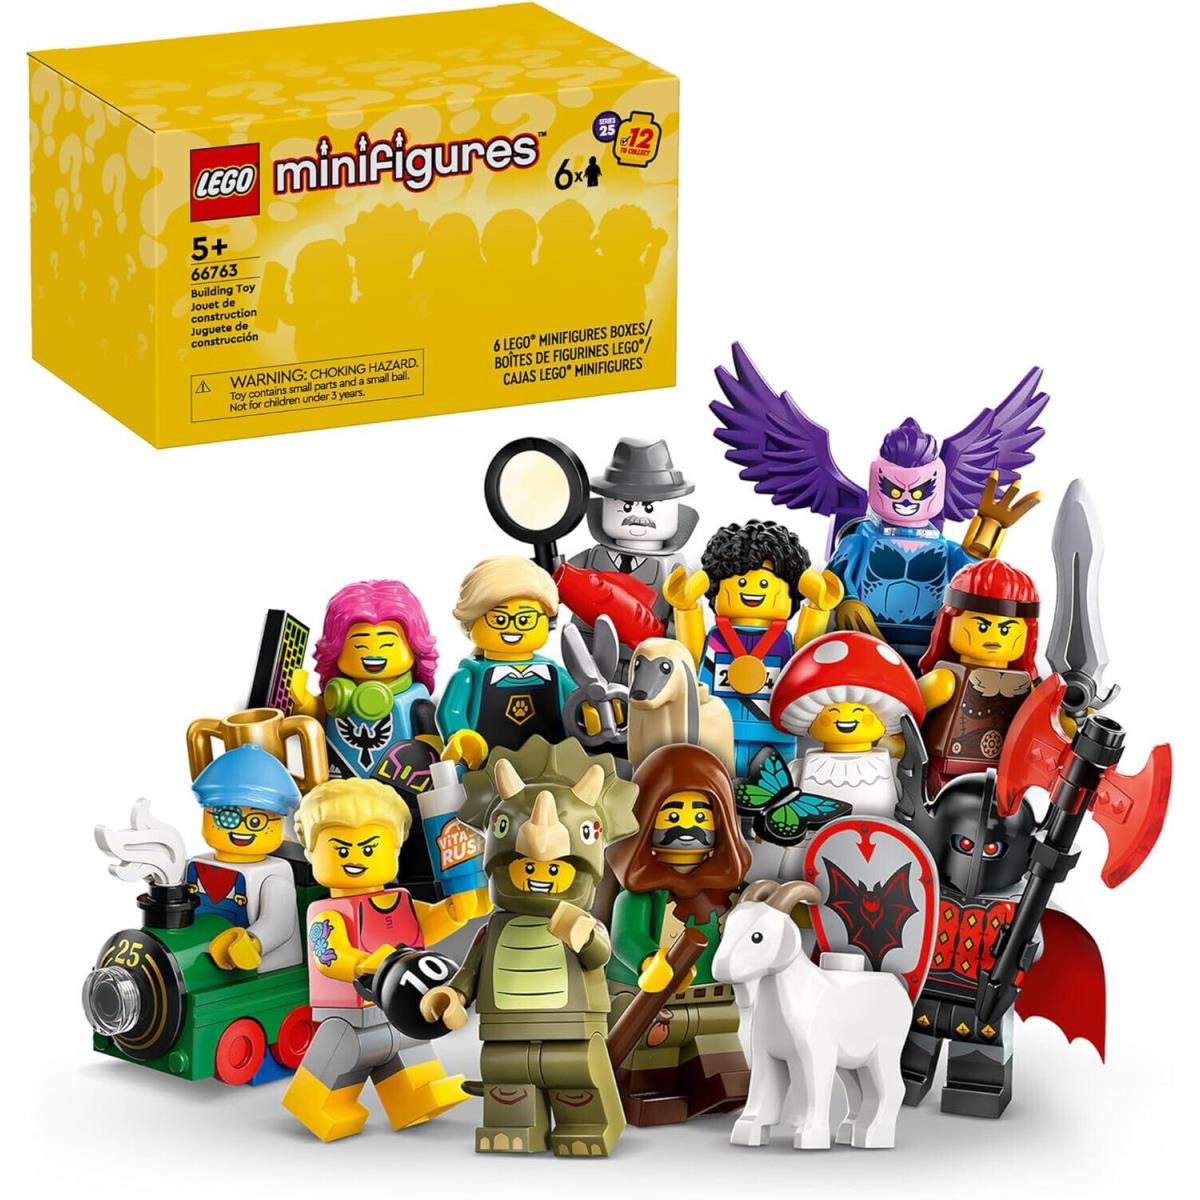 Lego Minifigures Series 25 66763 Mystery Blind Box 6 Minifigures Pack